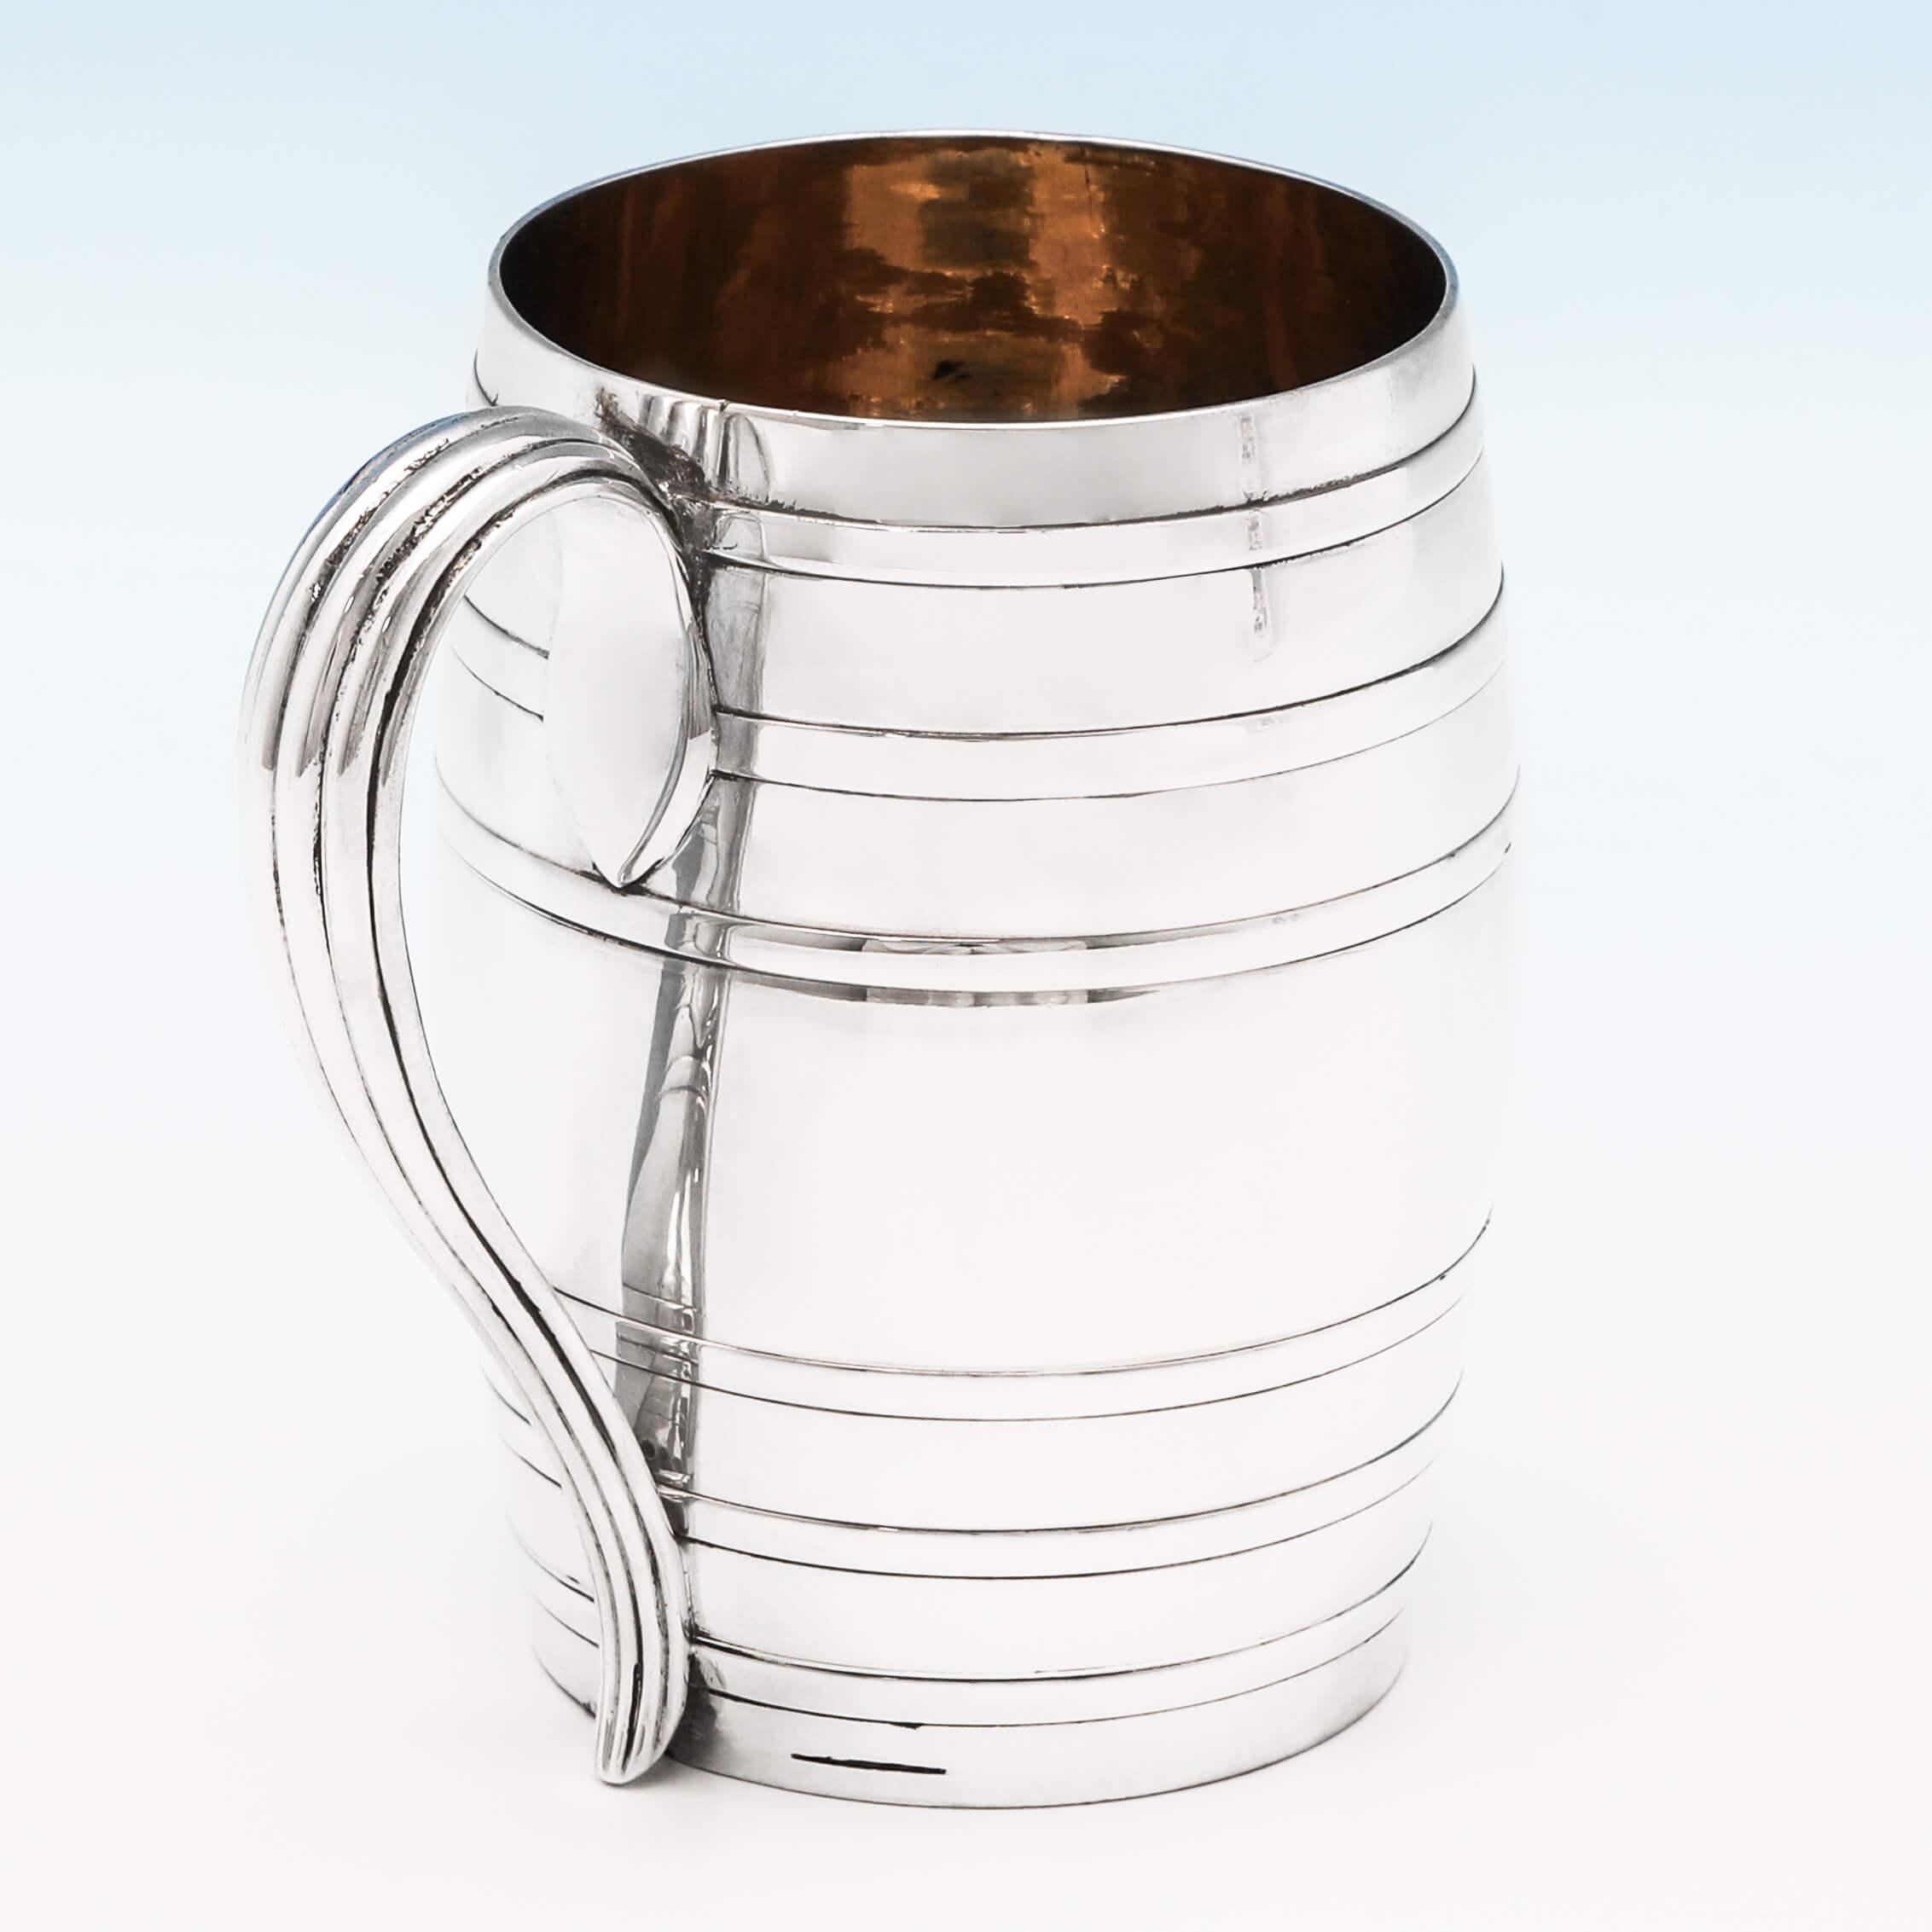 Hallmarked in London in 1778 by Lewis Pantin II, this handsome, George III, antique sterling silver mug, features a gilt interior, and is designed to look like a beer barrel. The mug measures 4